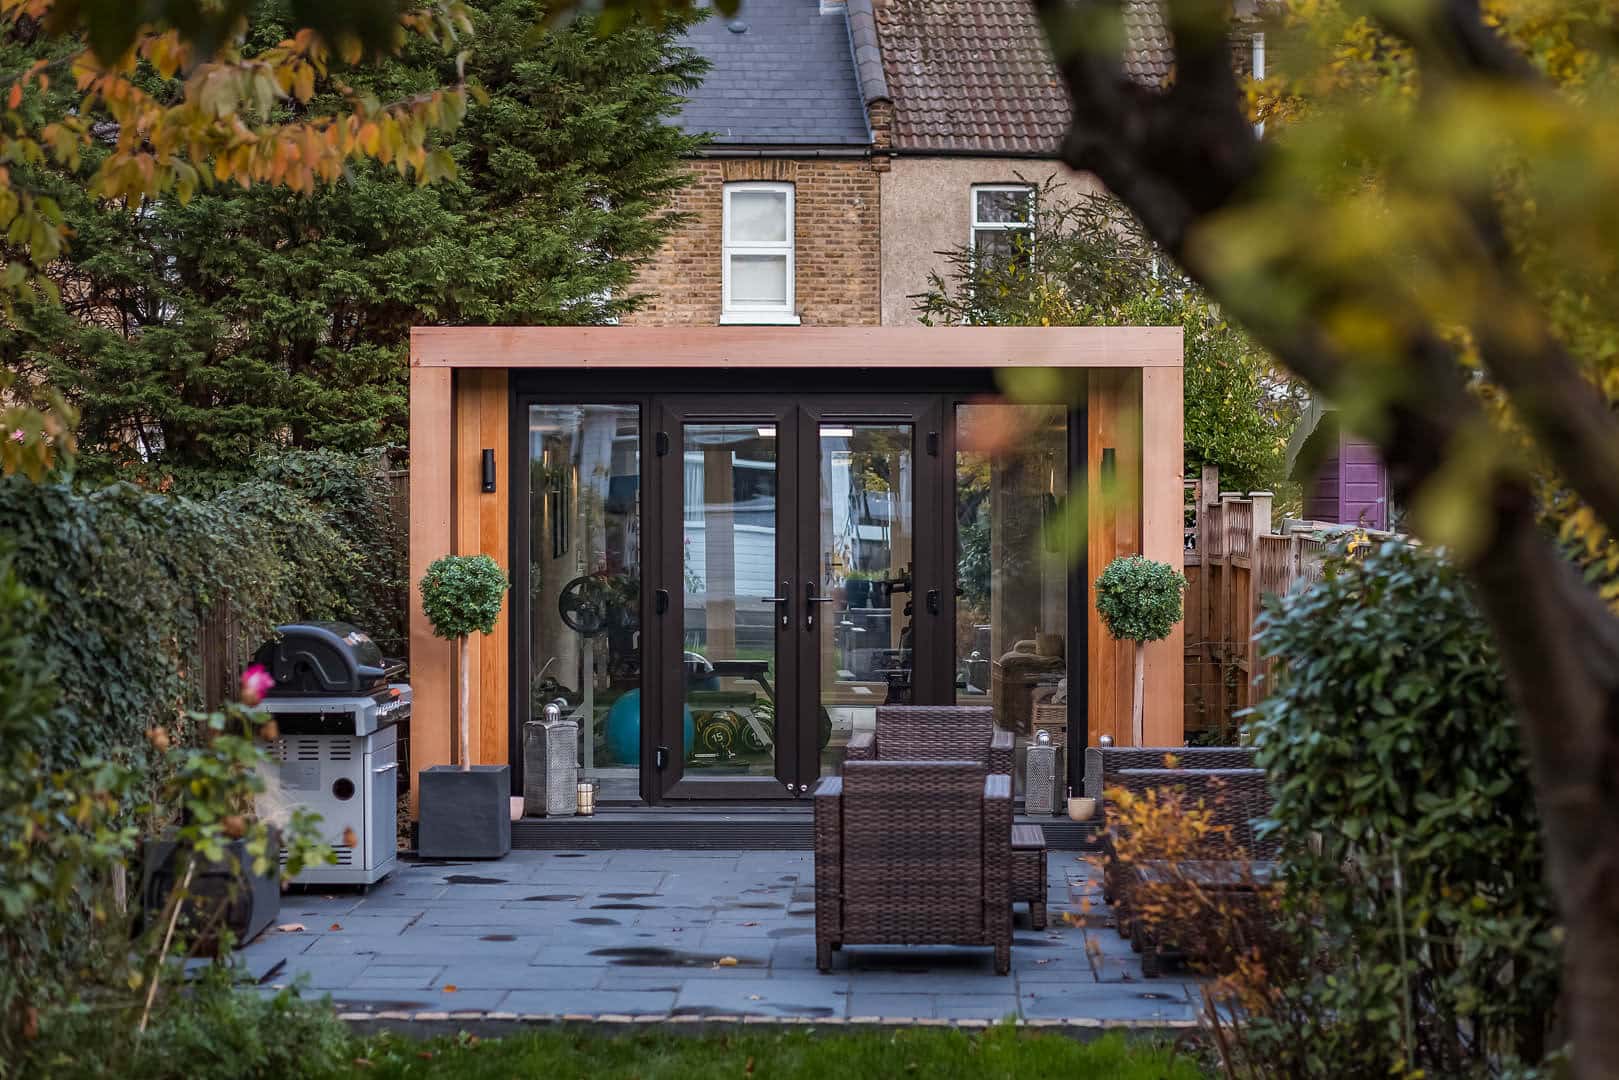 garden room with outdoor seating area